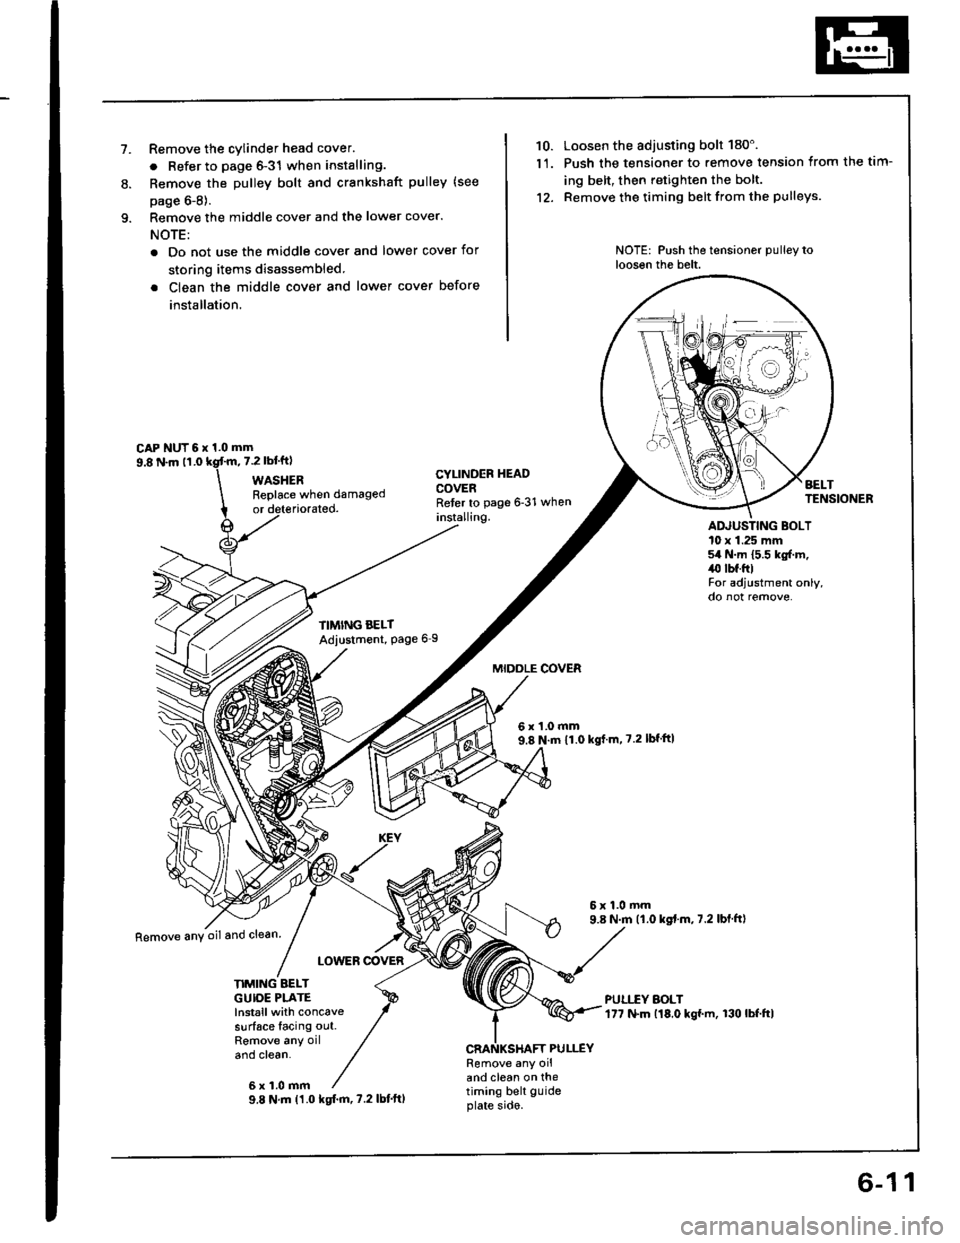 HONDA INTEGRA 1994 4.G Workshop Manual 1.Remove the cylinder head cover.
. Refer to page 6-31 when installing.
Remove the Dulley bolt and crankshaft pulley (see
page 6-8).
Remove the middle cover and the lower cover.
NOTE:
. Do not use the